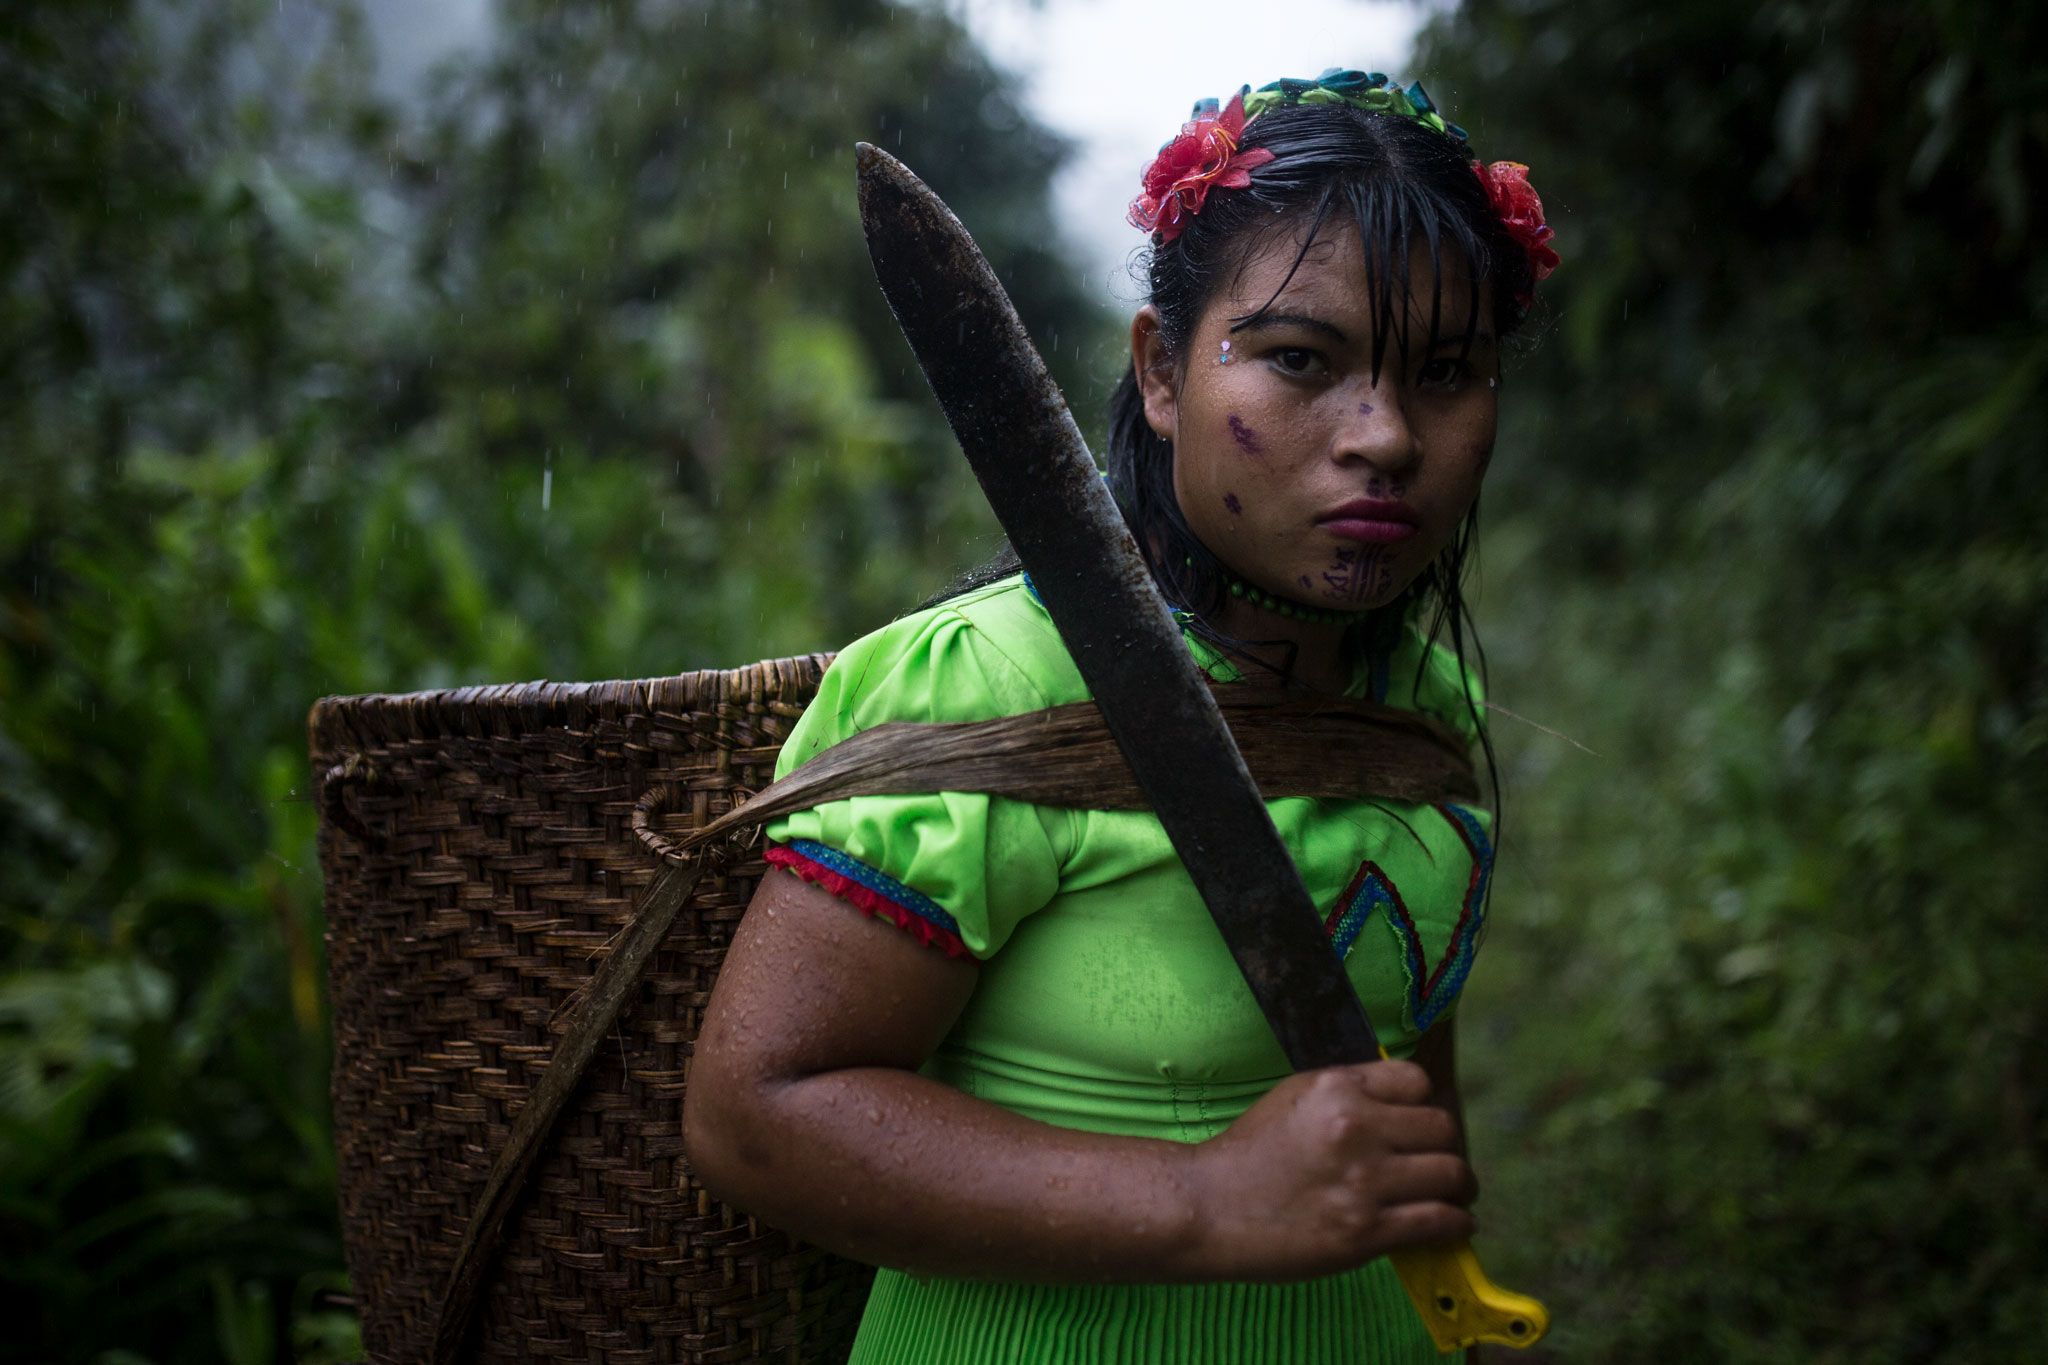 See Photo of the Resilient Women of La Puria, Colombia